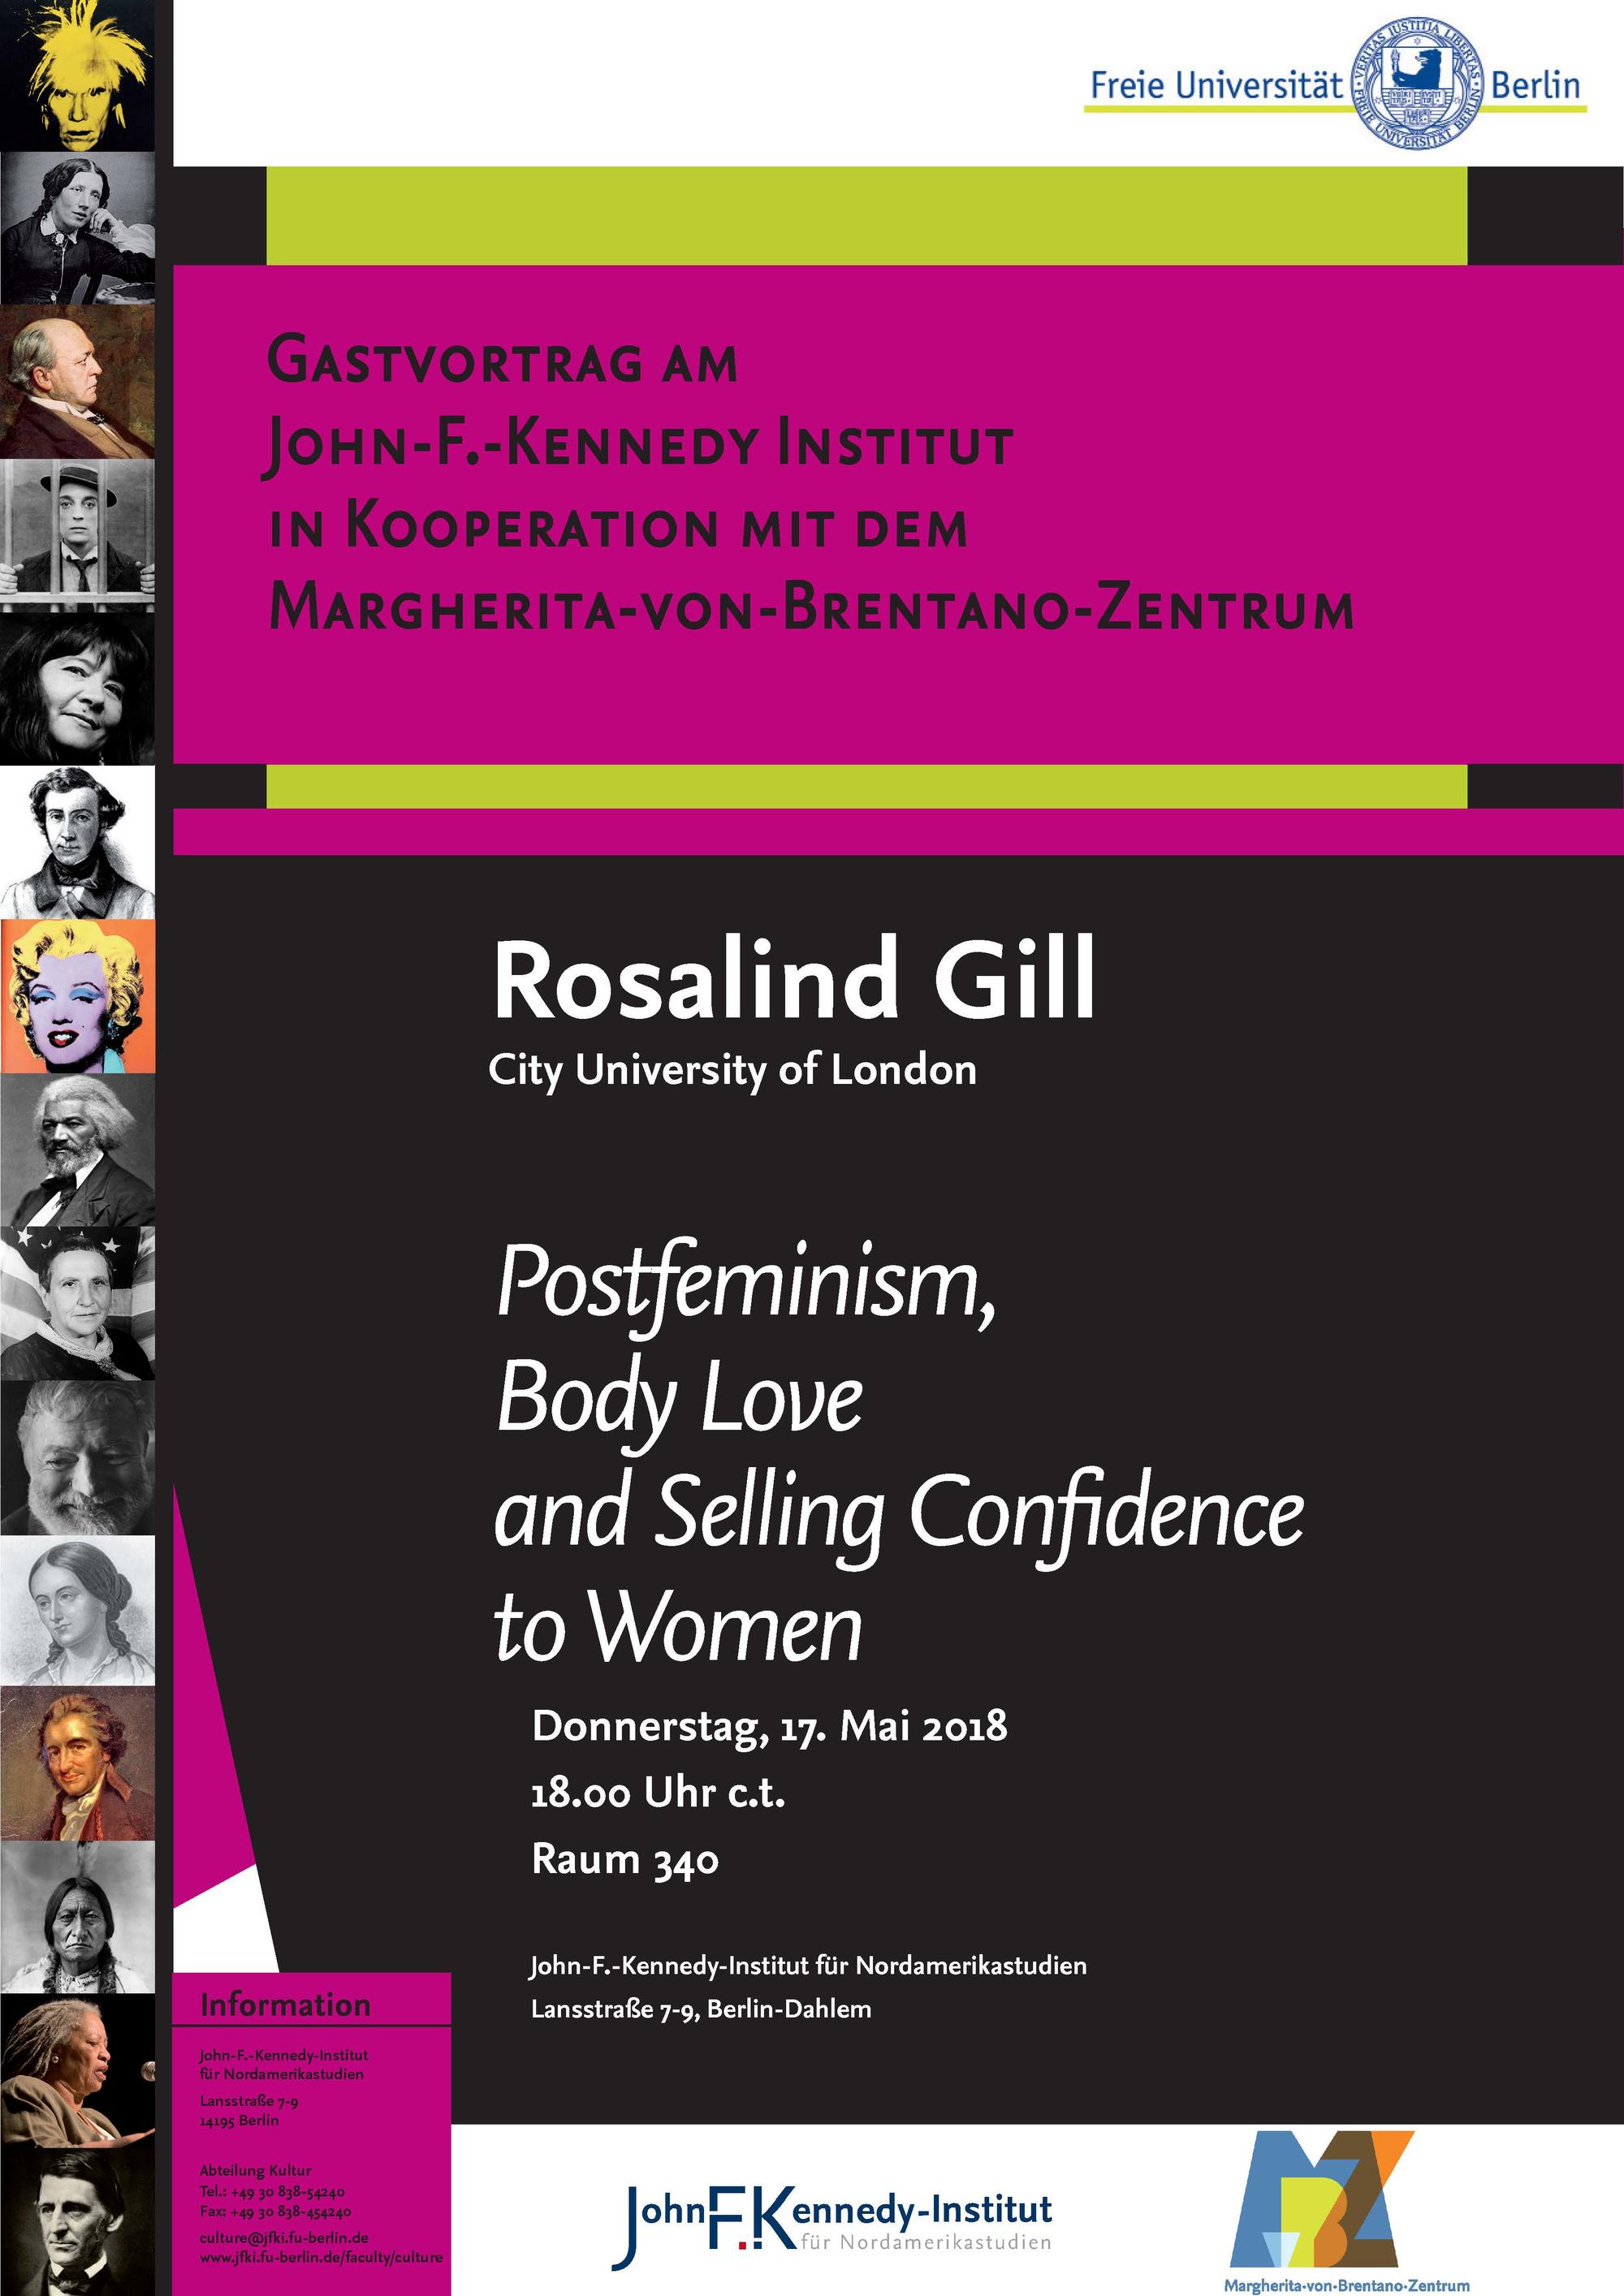 Lecture Rosalind Gill 17.5.2018